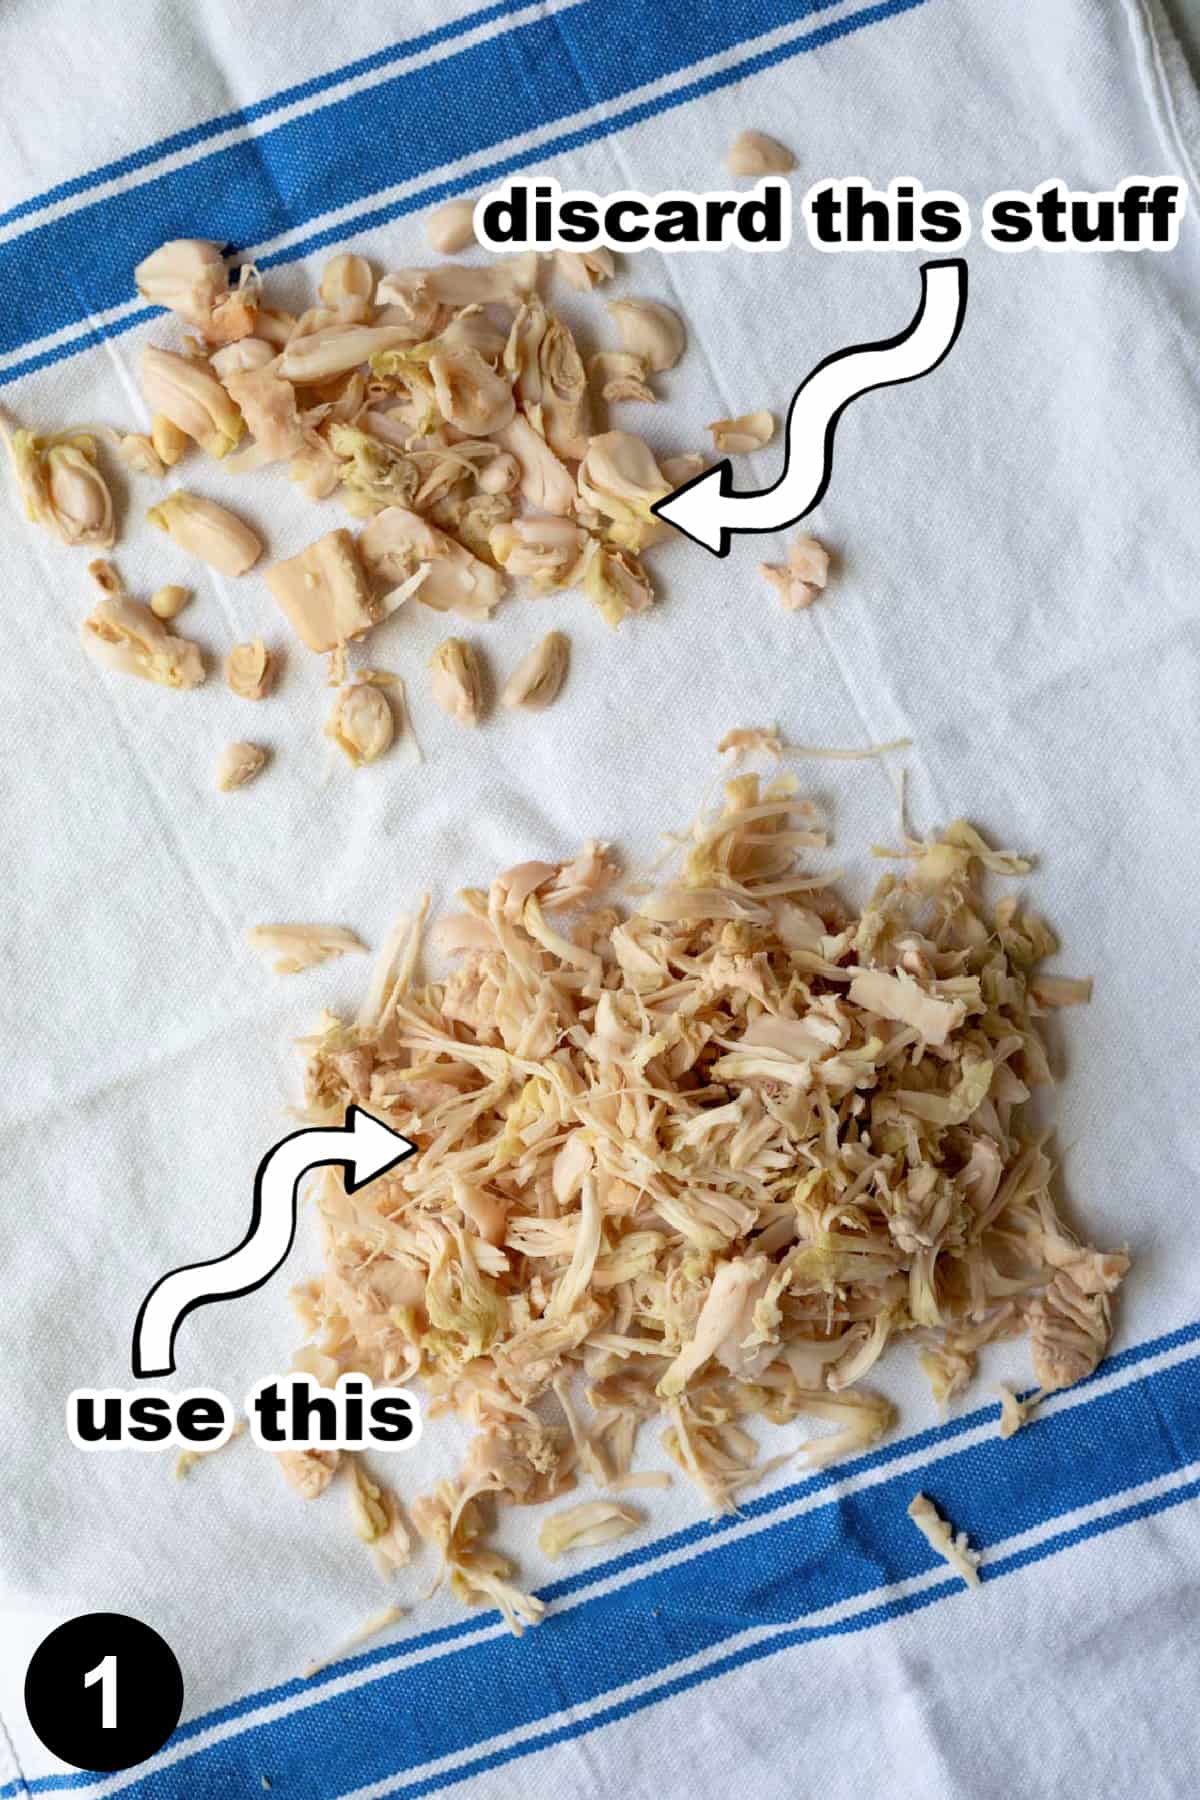 jackfruit on a towel, separated seeds to discard from the shredded parts.